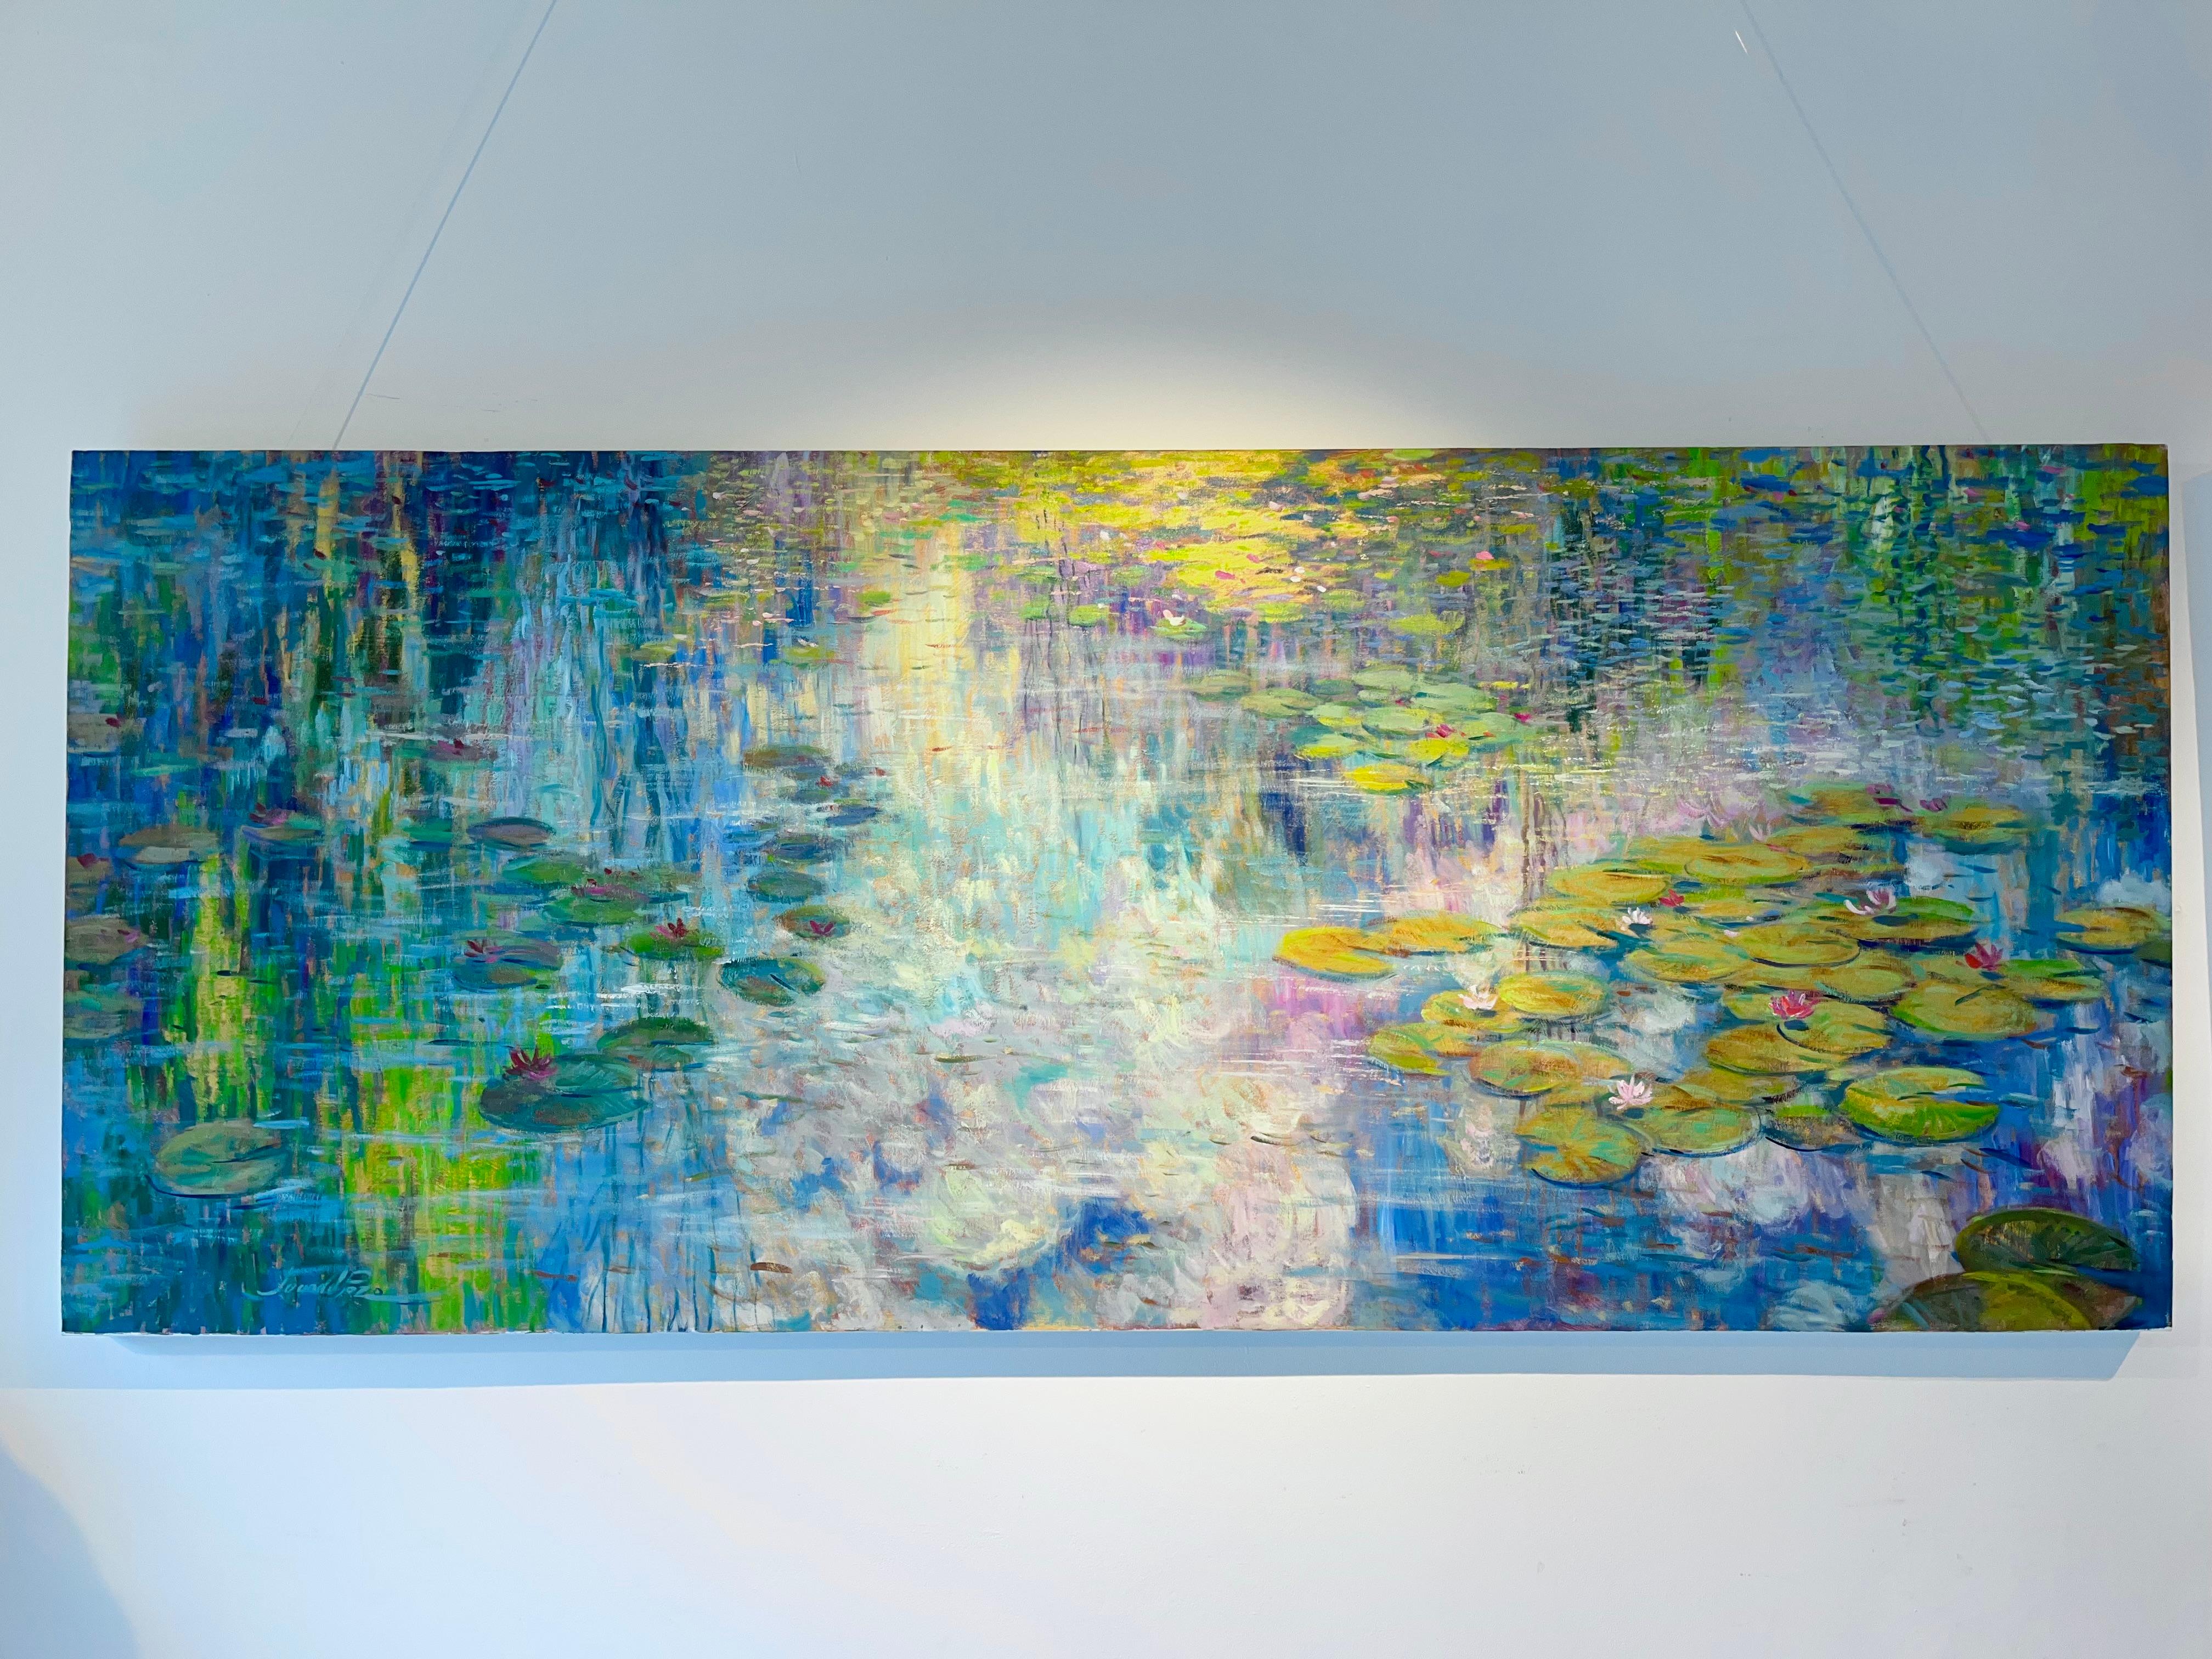 Sky Mirror-original impressionism waterlily landscape painting-contemporary art - Painting by Juan del Pozo